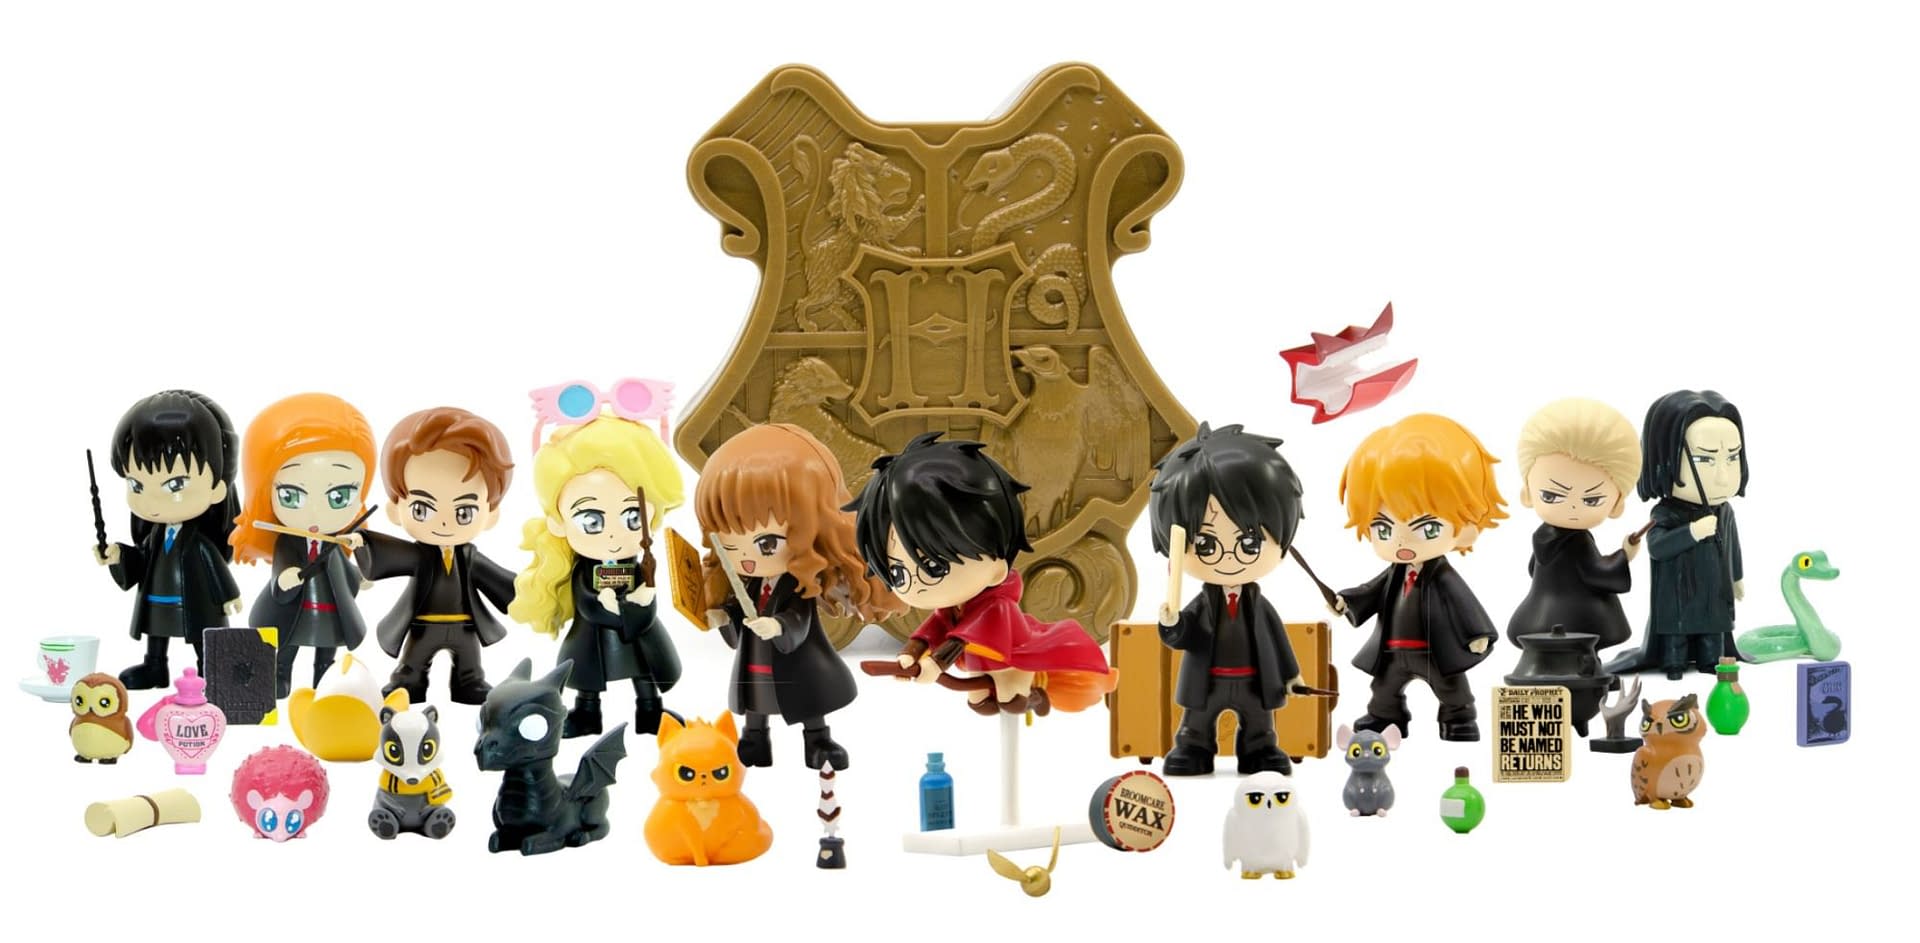 harry potter figures walmart Cheaper Than Retail Price> Buy Clothing, Accessories and lifestyle ...